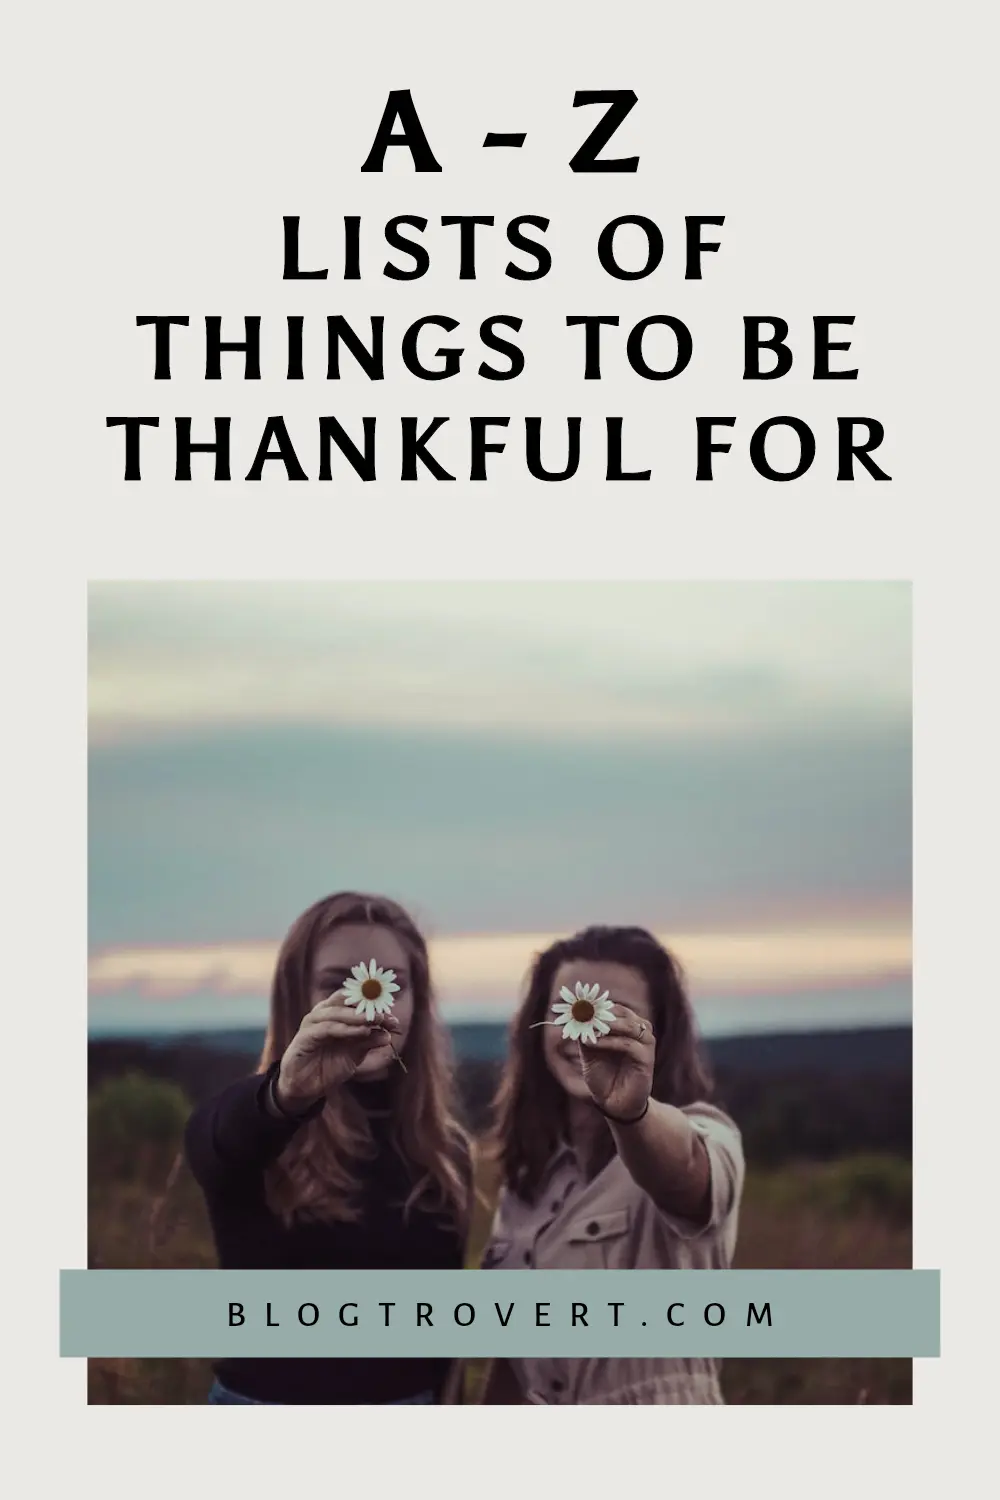 A-Z Unique Gratitude List Ideas - 100 things to be thankful for everyday 6